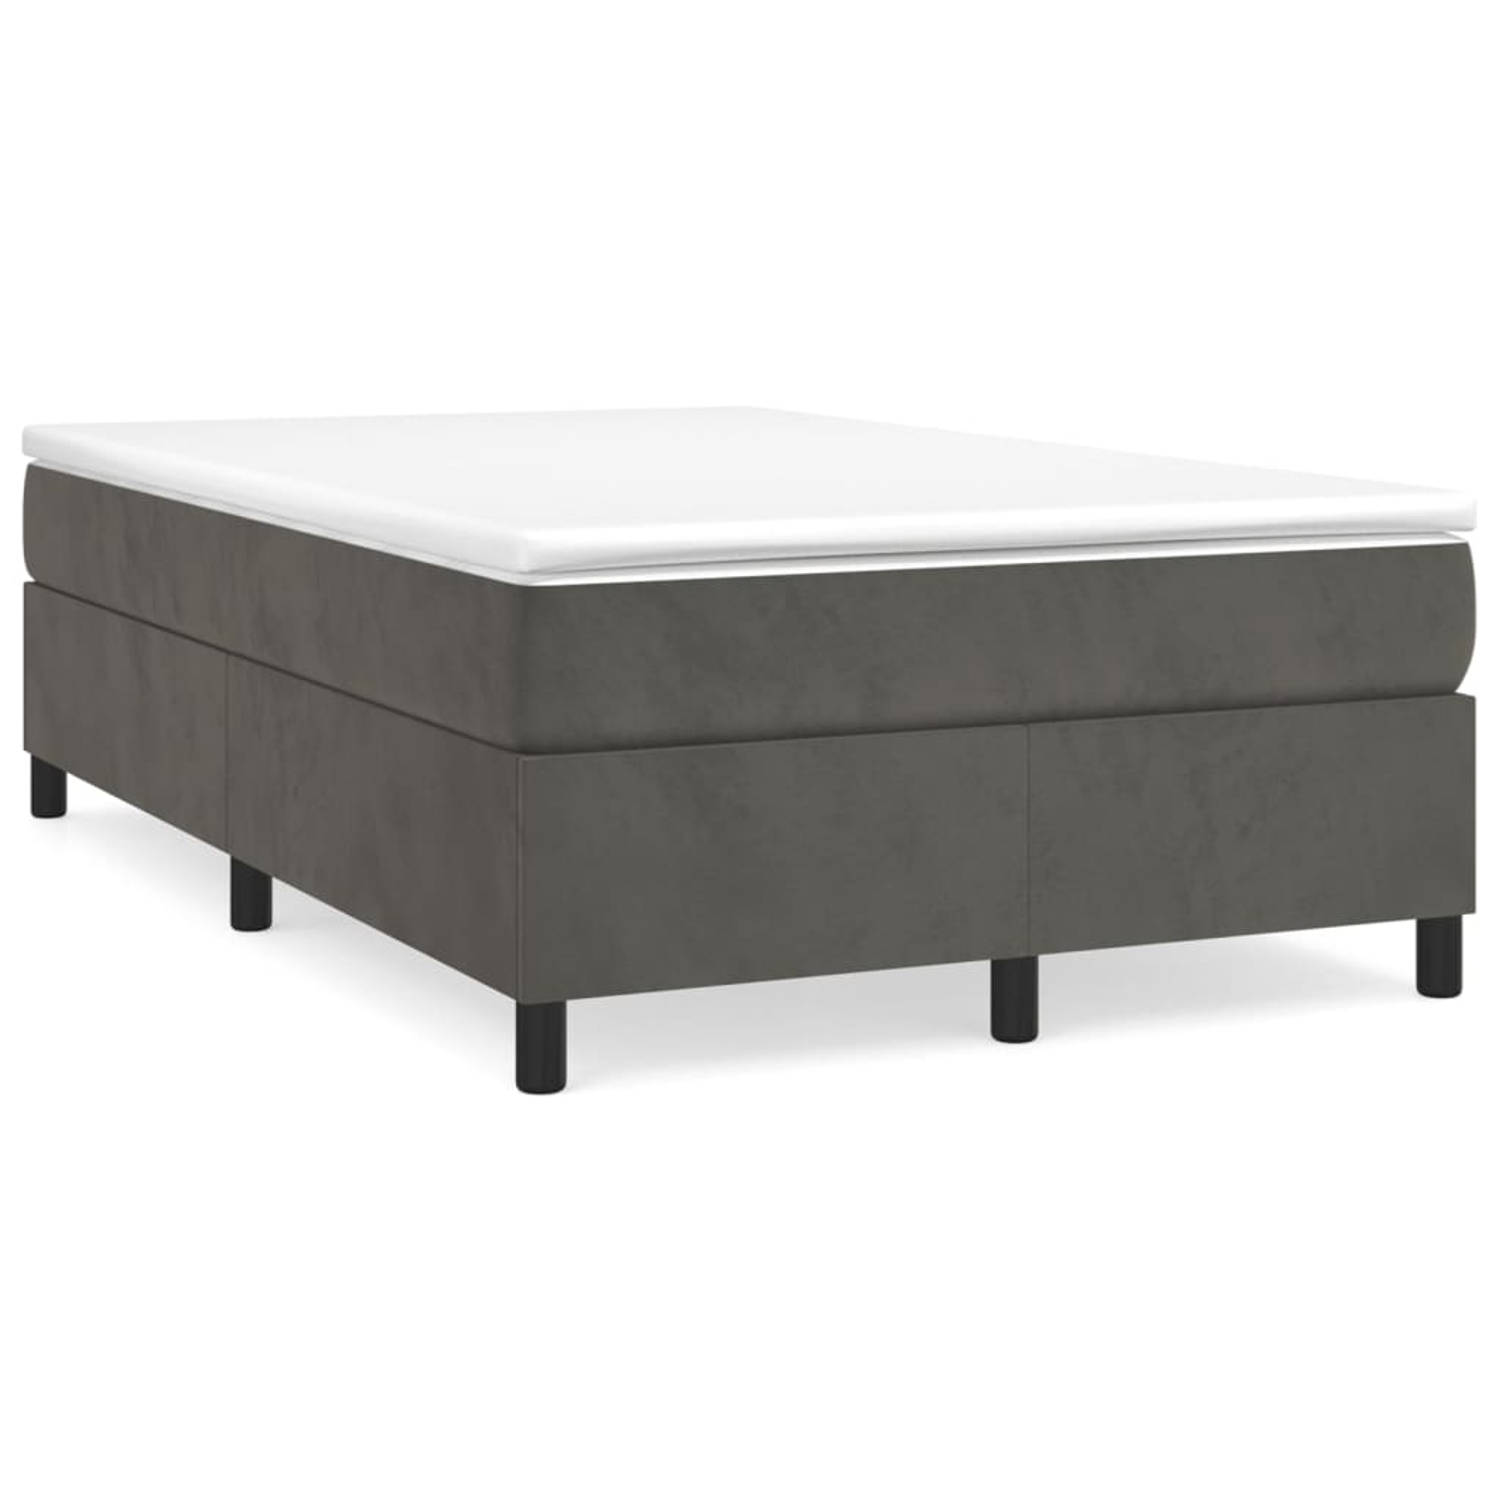 The Living Store Boxspringframe fluweel donkergrijs 120x200 cm - Bed